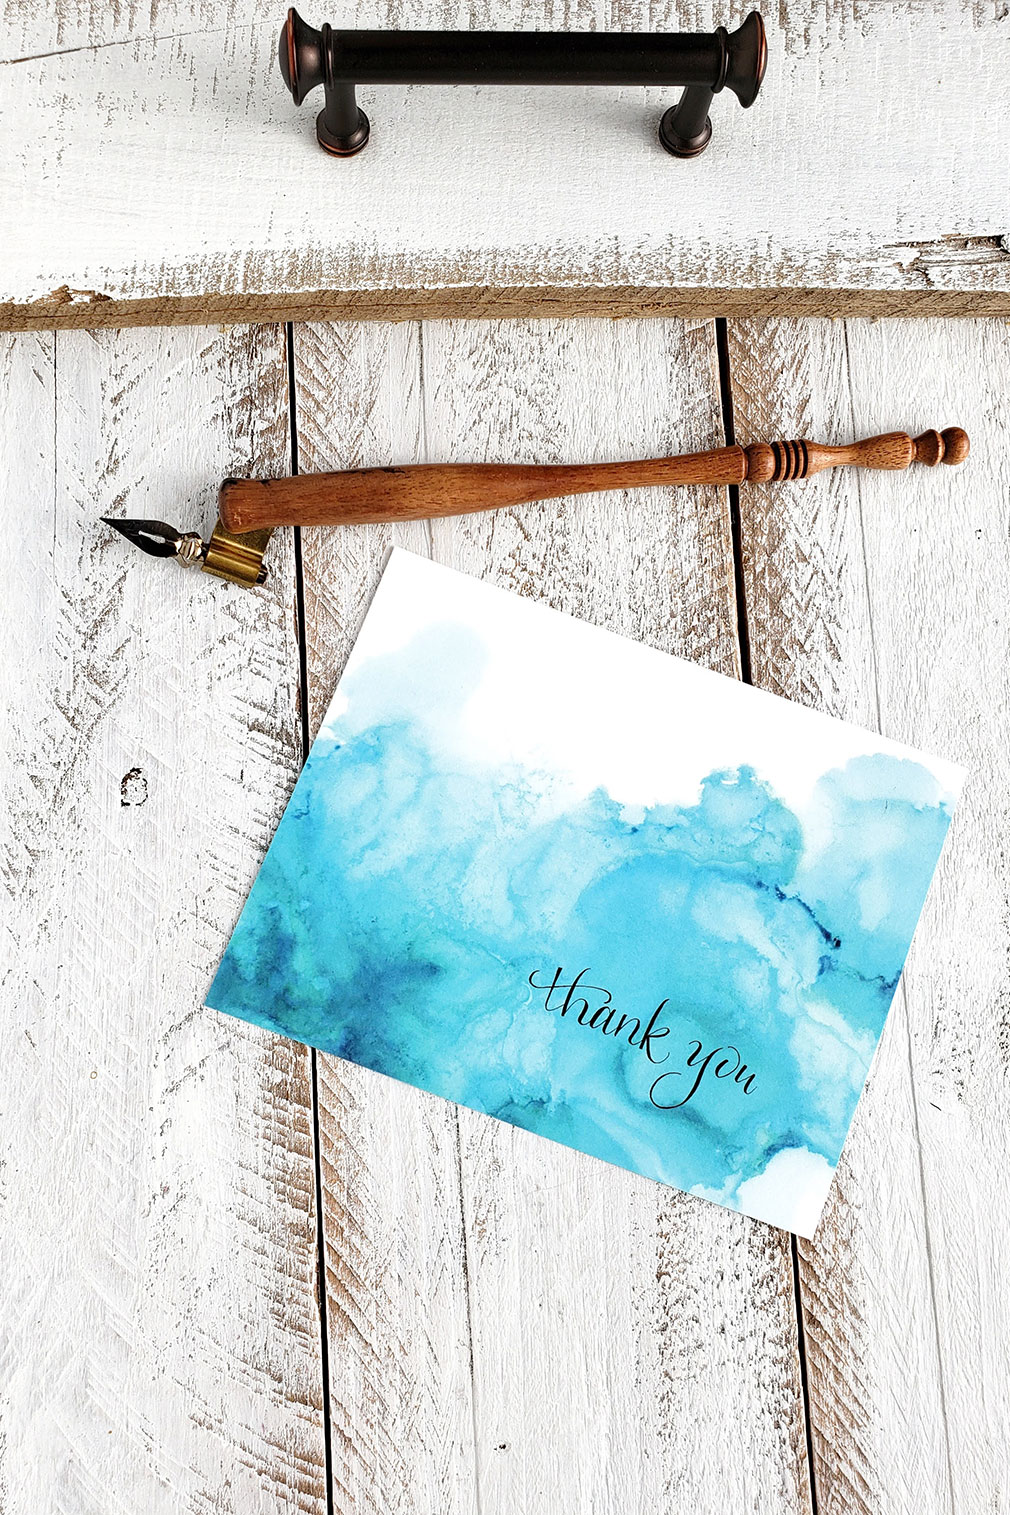 5 pack of Thank You Greeting Cards: hand painted watercolor thank